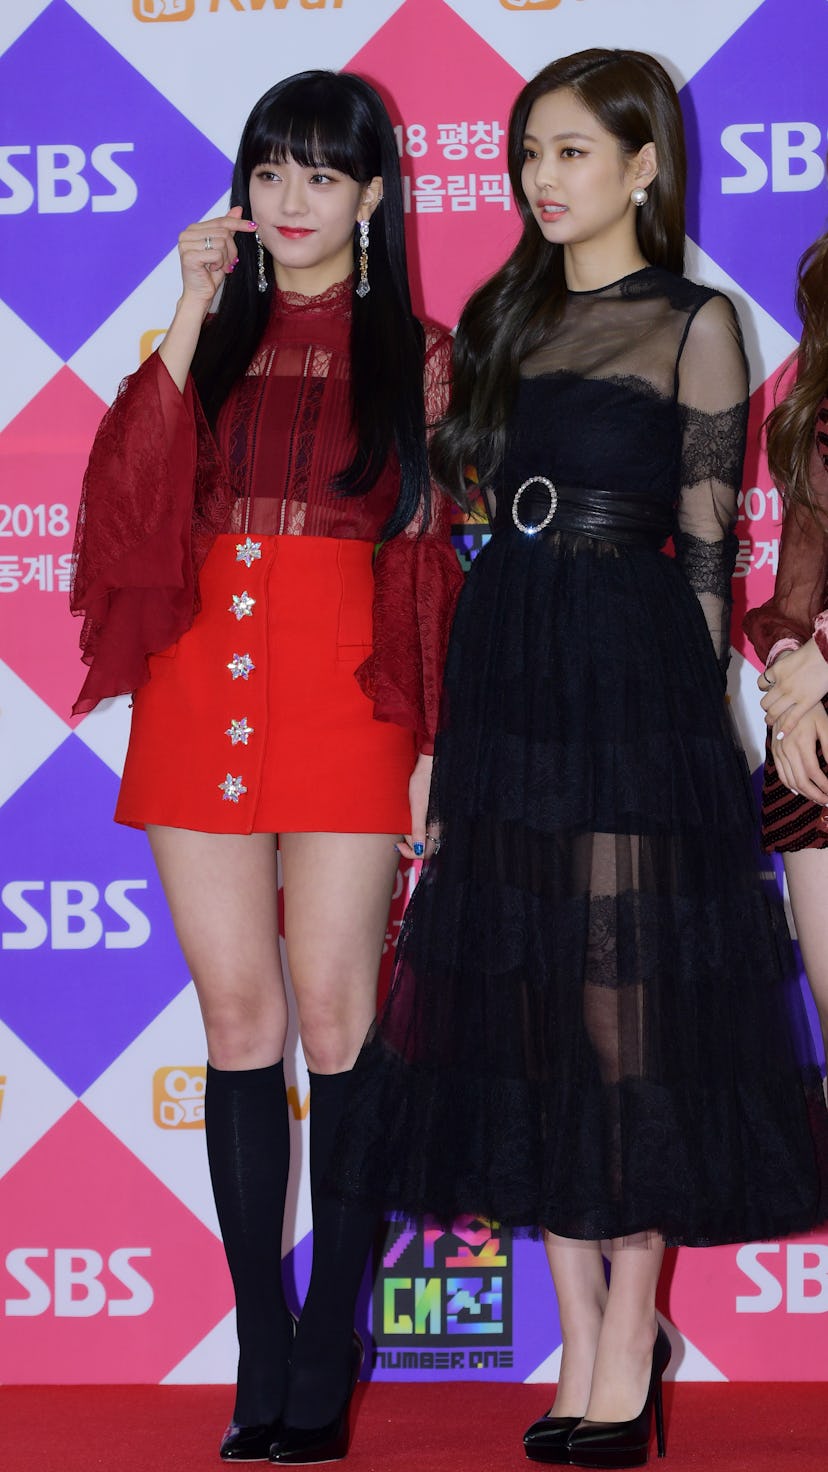 Jisoo and Jennie of BLACKPINK attend the 2017 SBS 'Battle of the Bands' wearing red and black outfit...